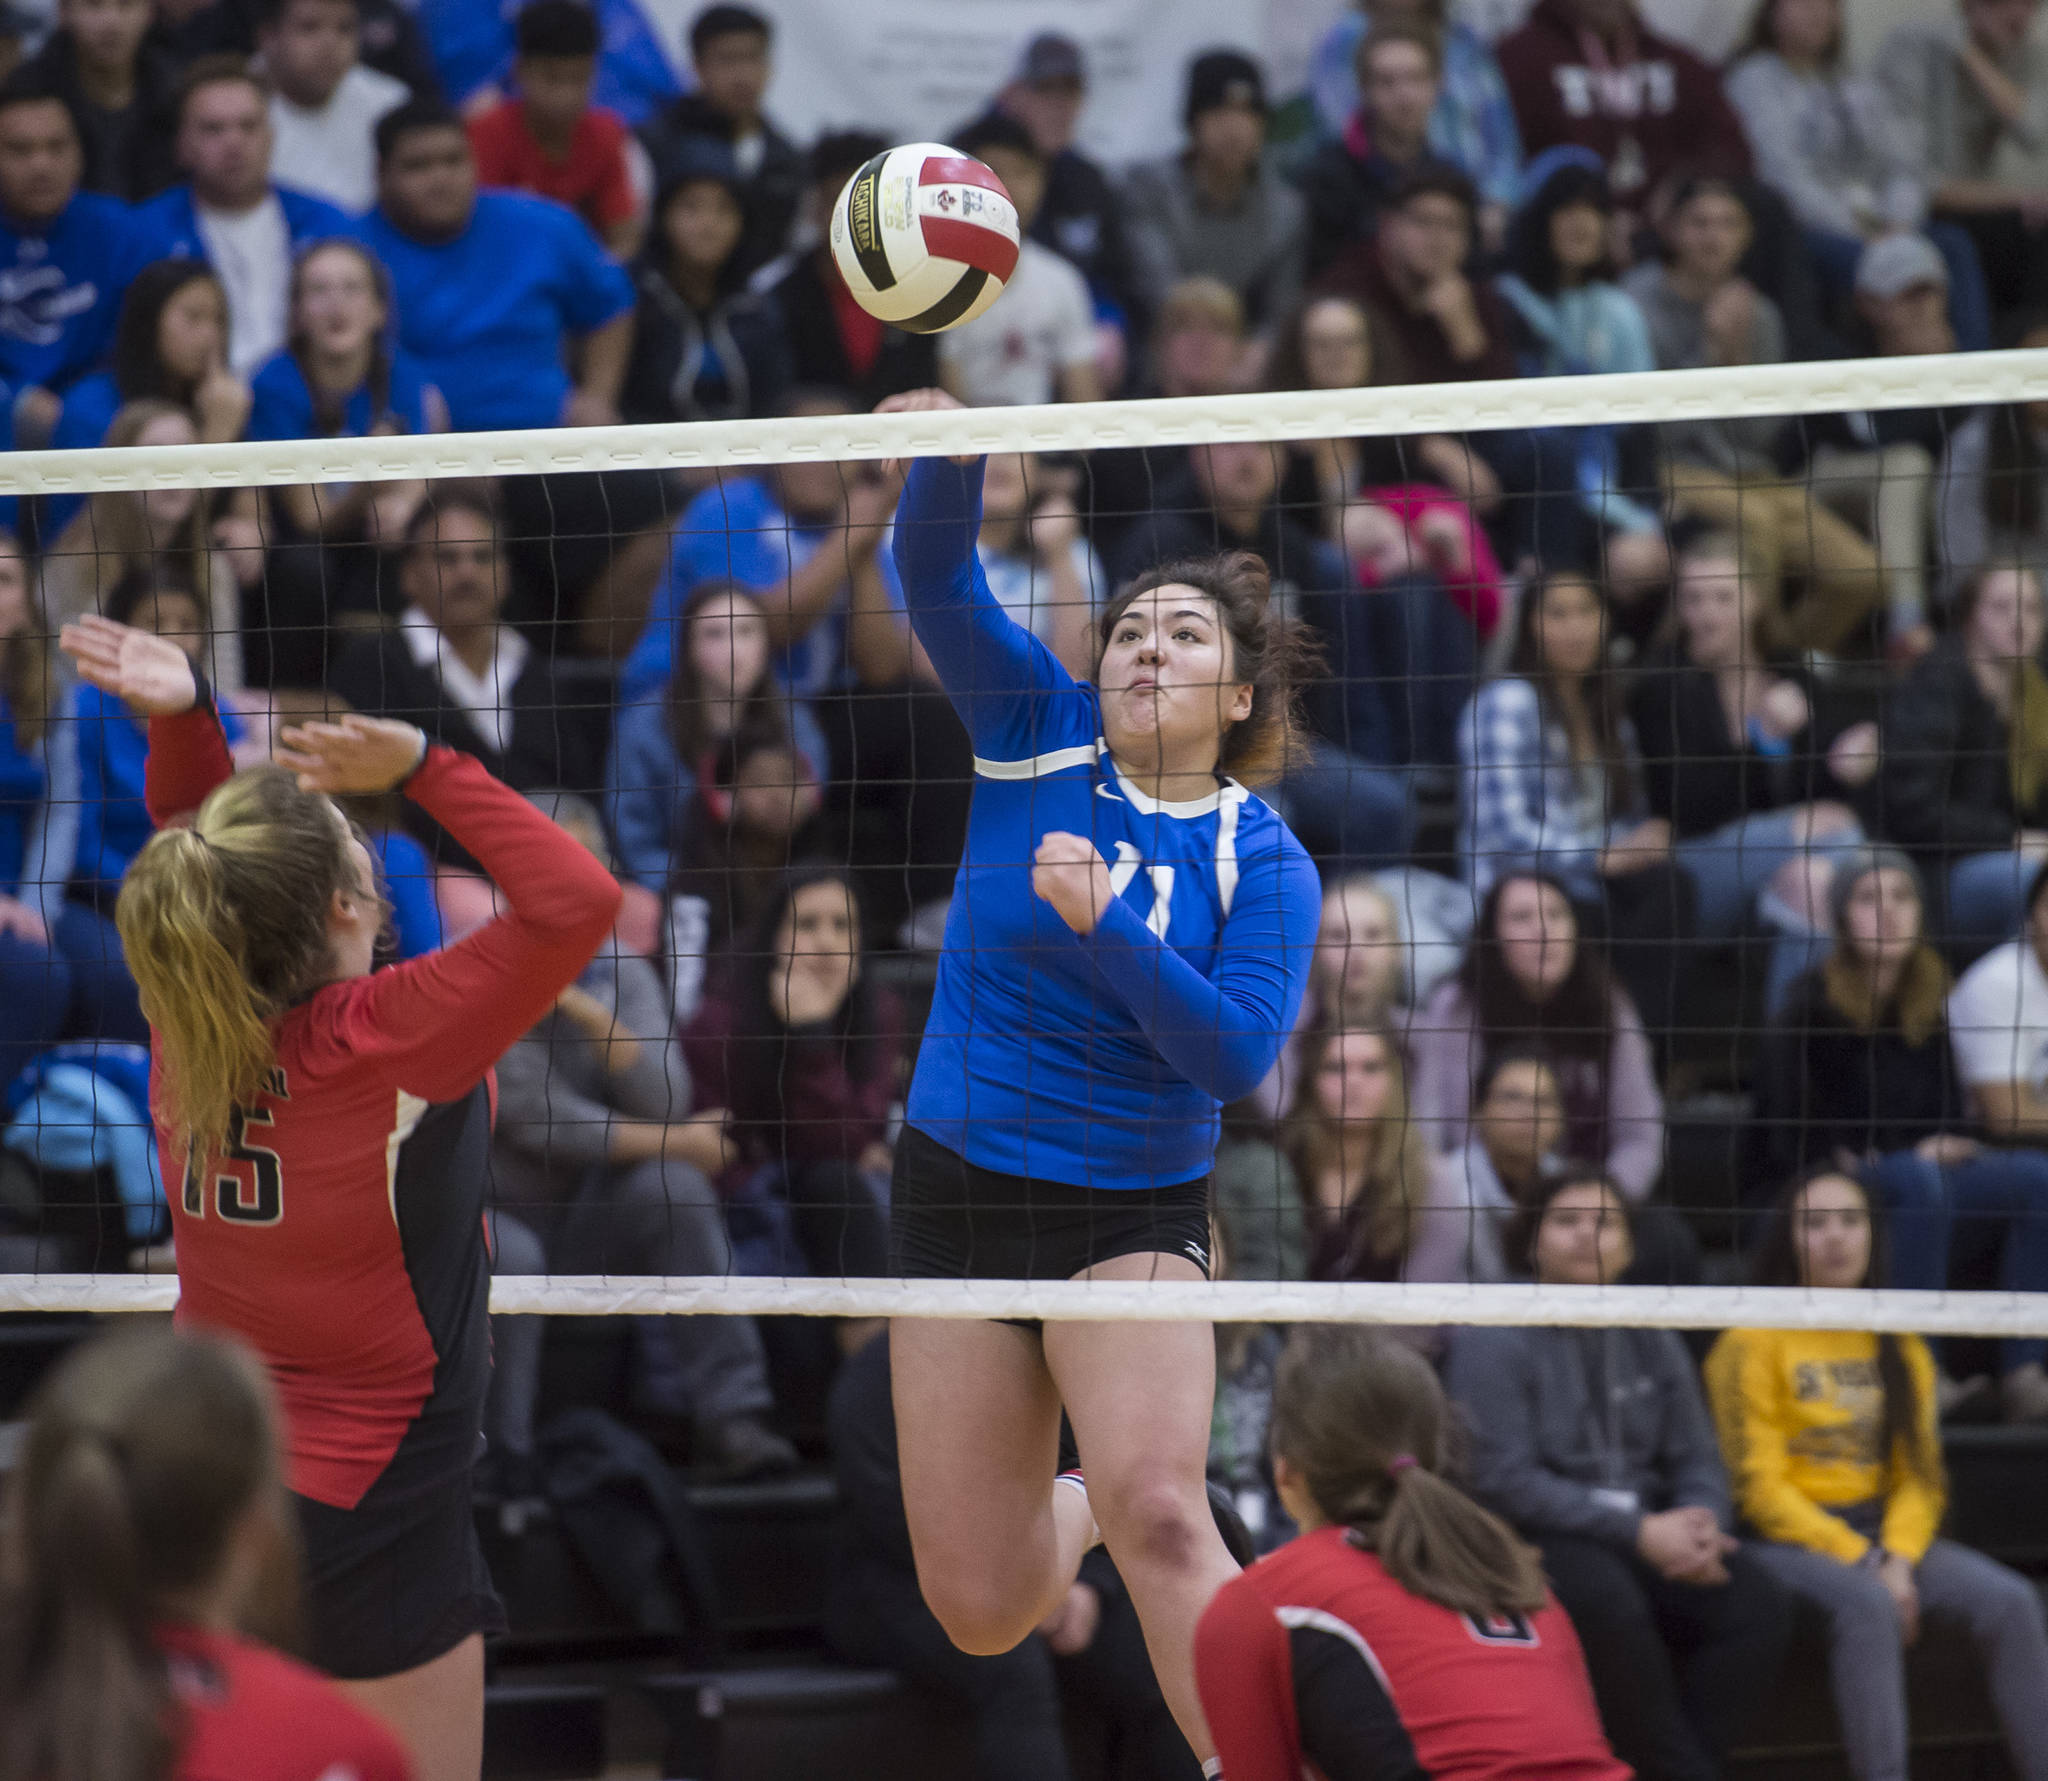 Thunder Mountain’s Tasi Fenumiai spikes the ball against Juneau-Douglas during the second round of the Region V Volleyball Championships at JDHS on Friday, Nov. 2, 2018. TMHS won 3-1 (25-20, 25-10, 16-25, 25-21). (Michael Penn | Juneau Empire)